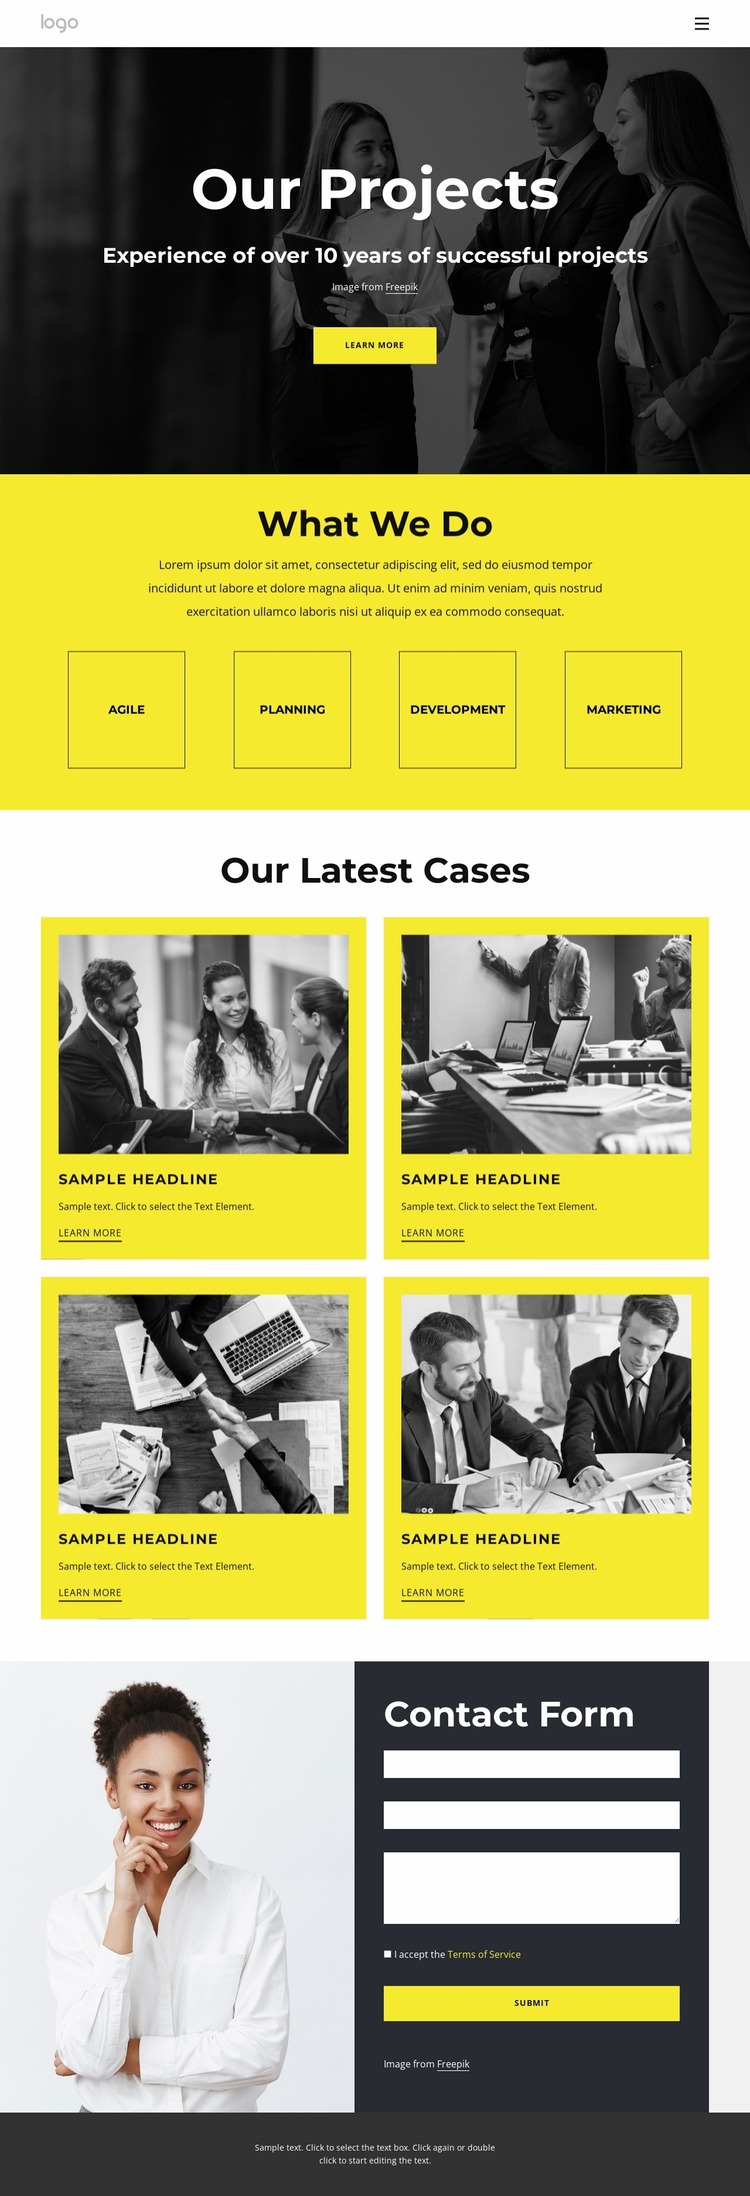 Our consulting success stories Website Mockup